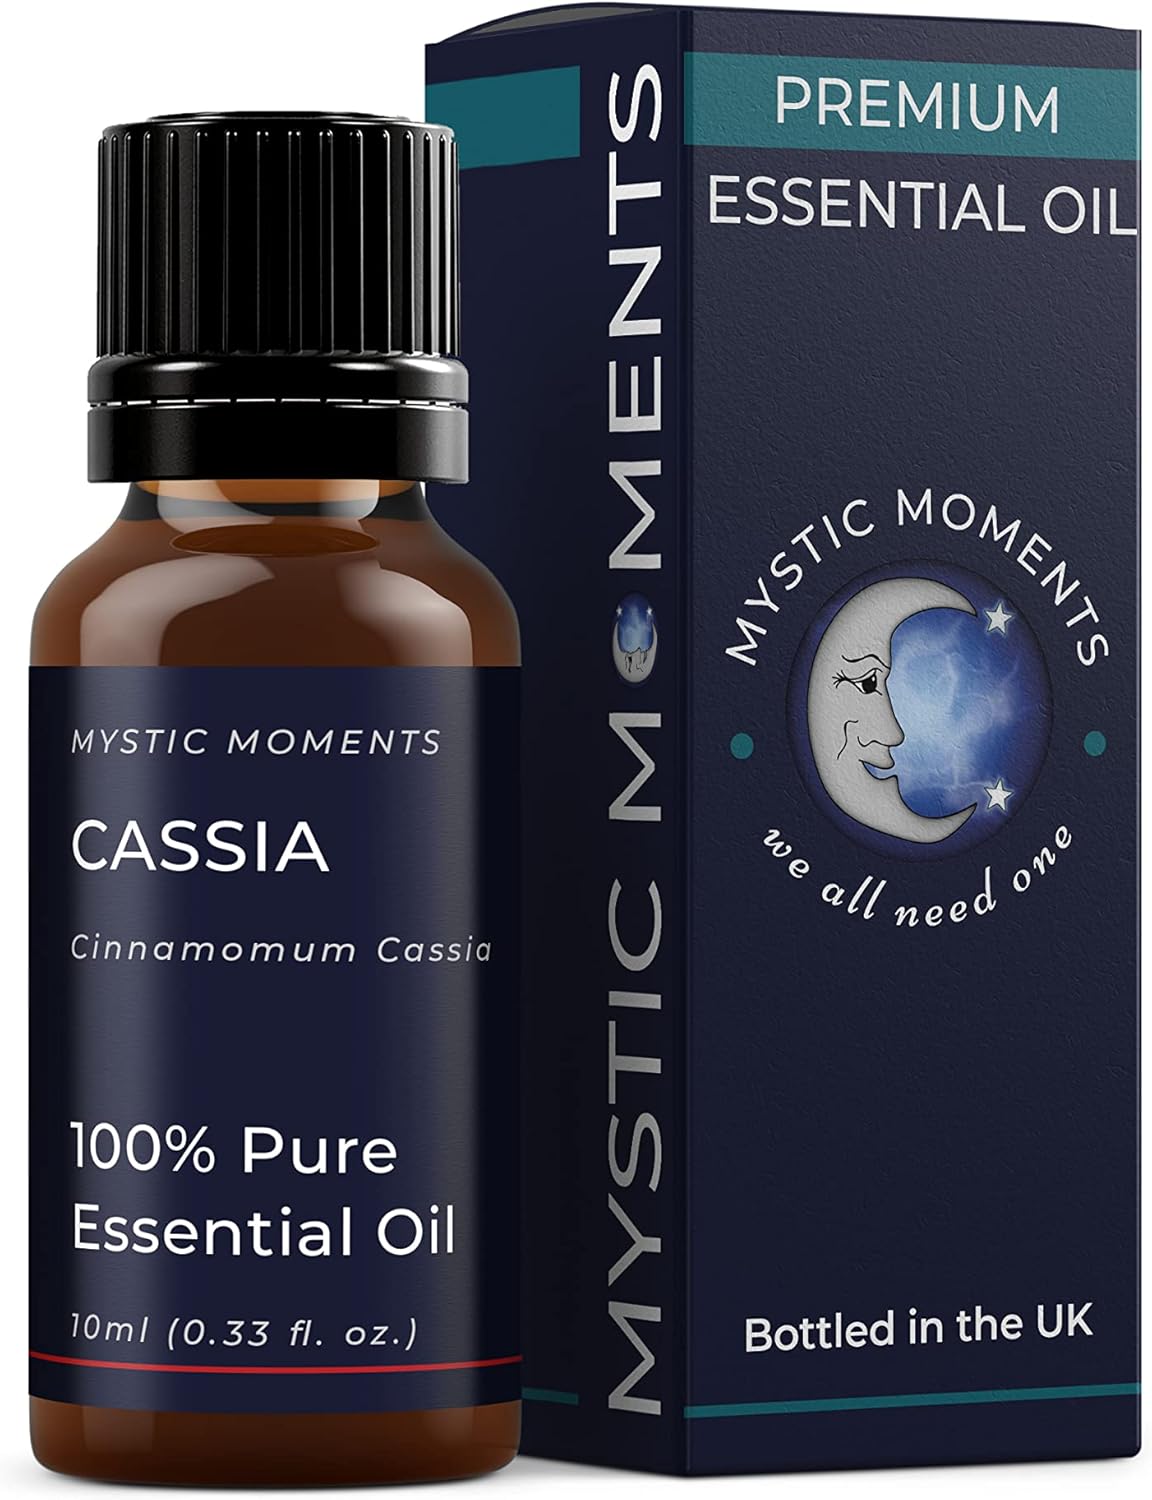 Mystic Moments | Cassia Essential Oil 10ml - Pure & Natural oil for Diffusers, Aromatherapy & Massage Blends Vegan GMO Free